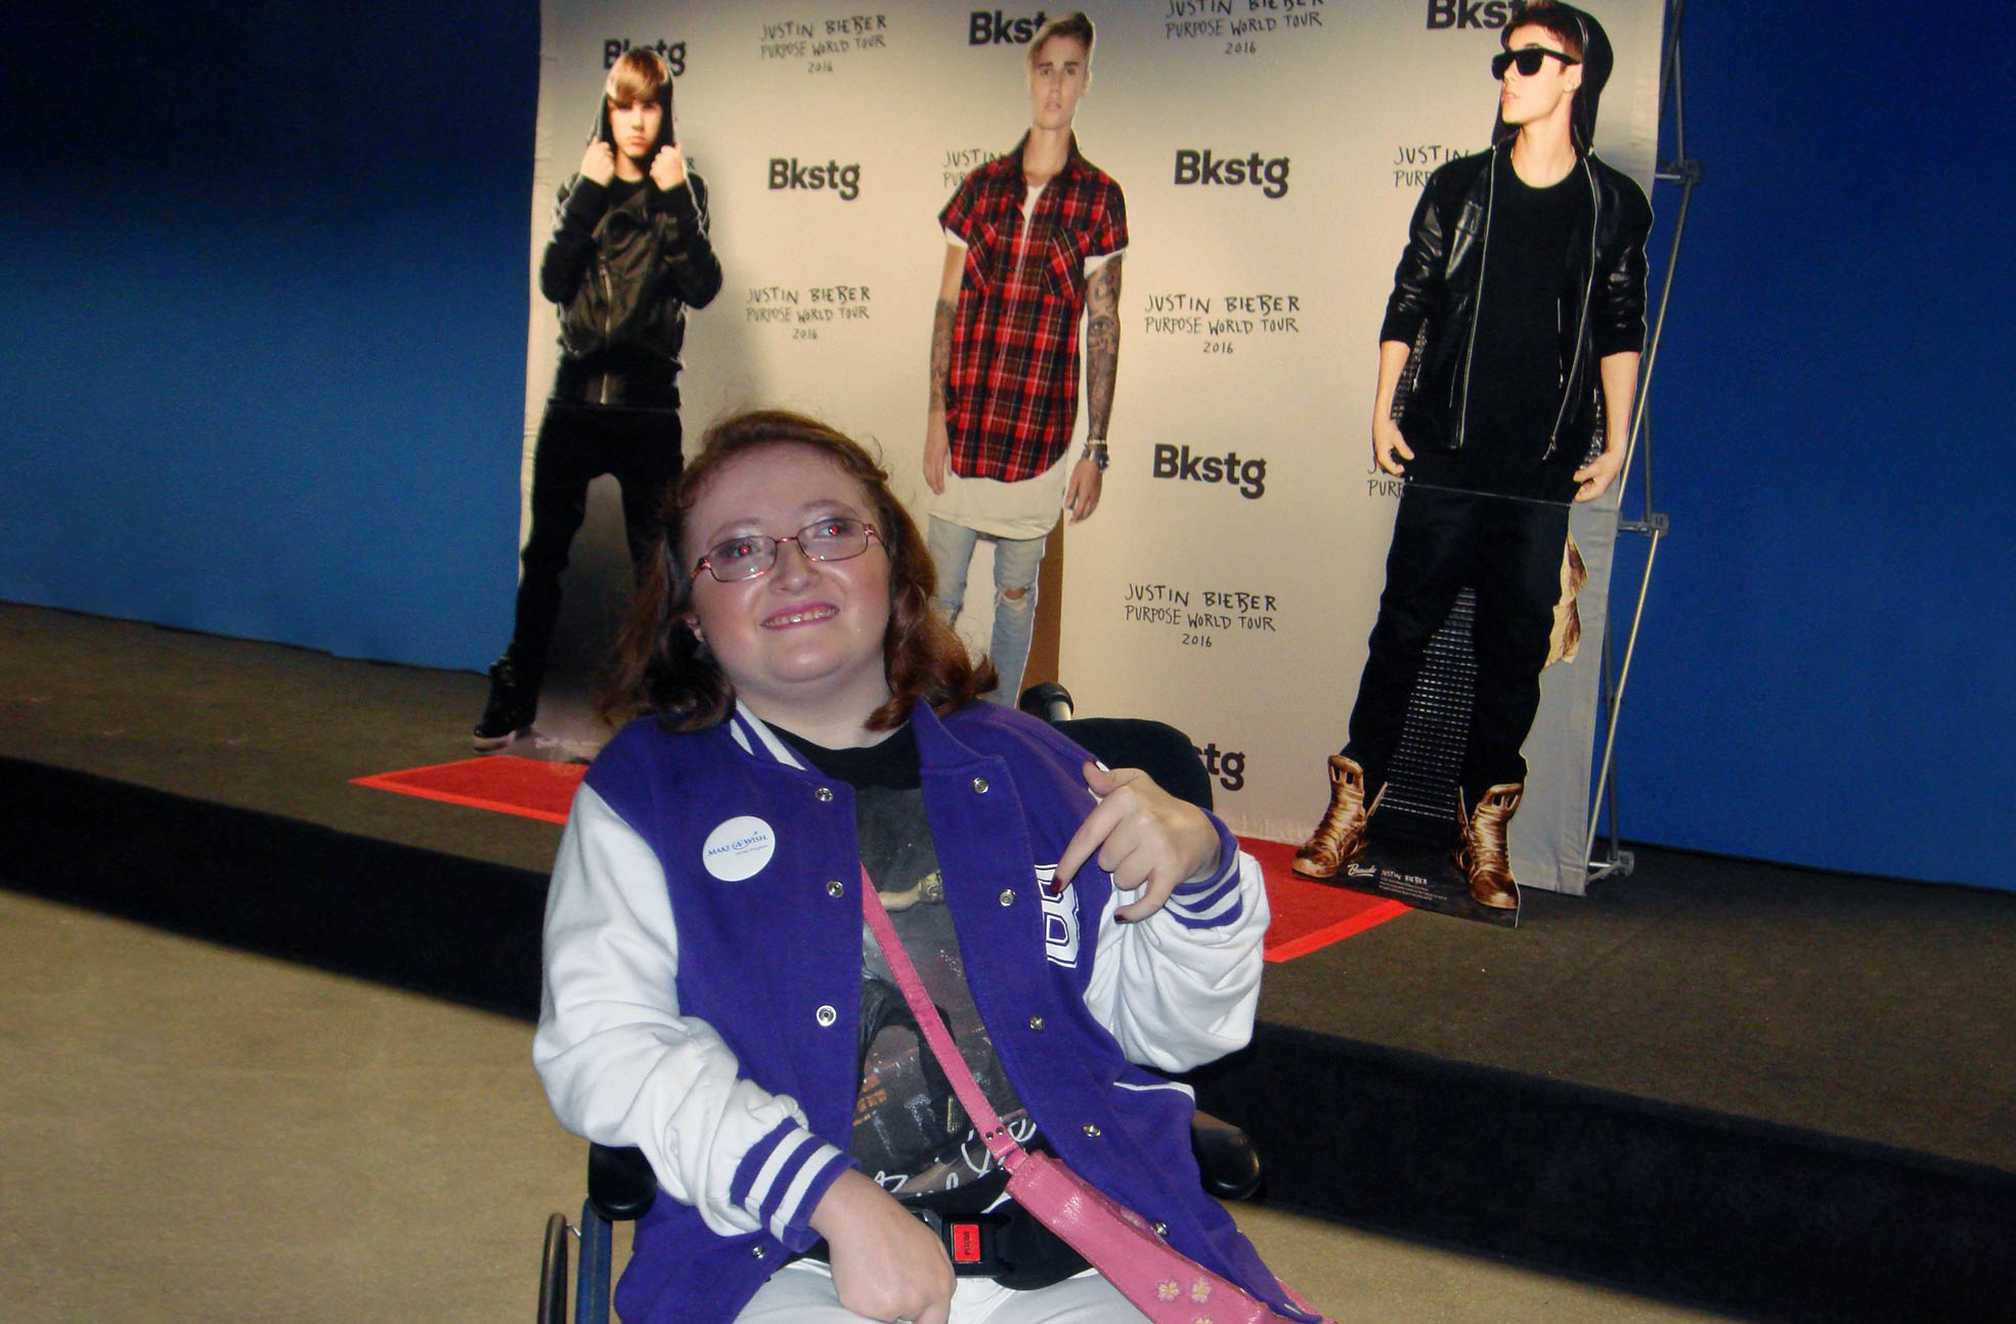 Imi in front of some life-sized posters of Justin Bieber, during her wish to meet the singer.